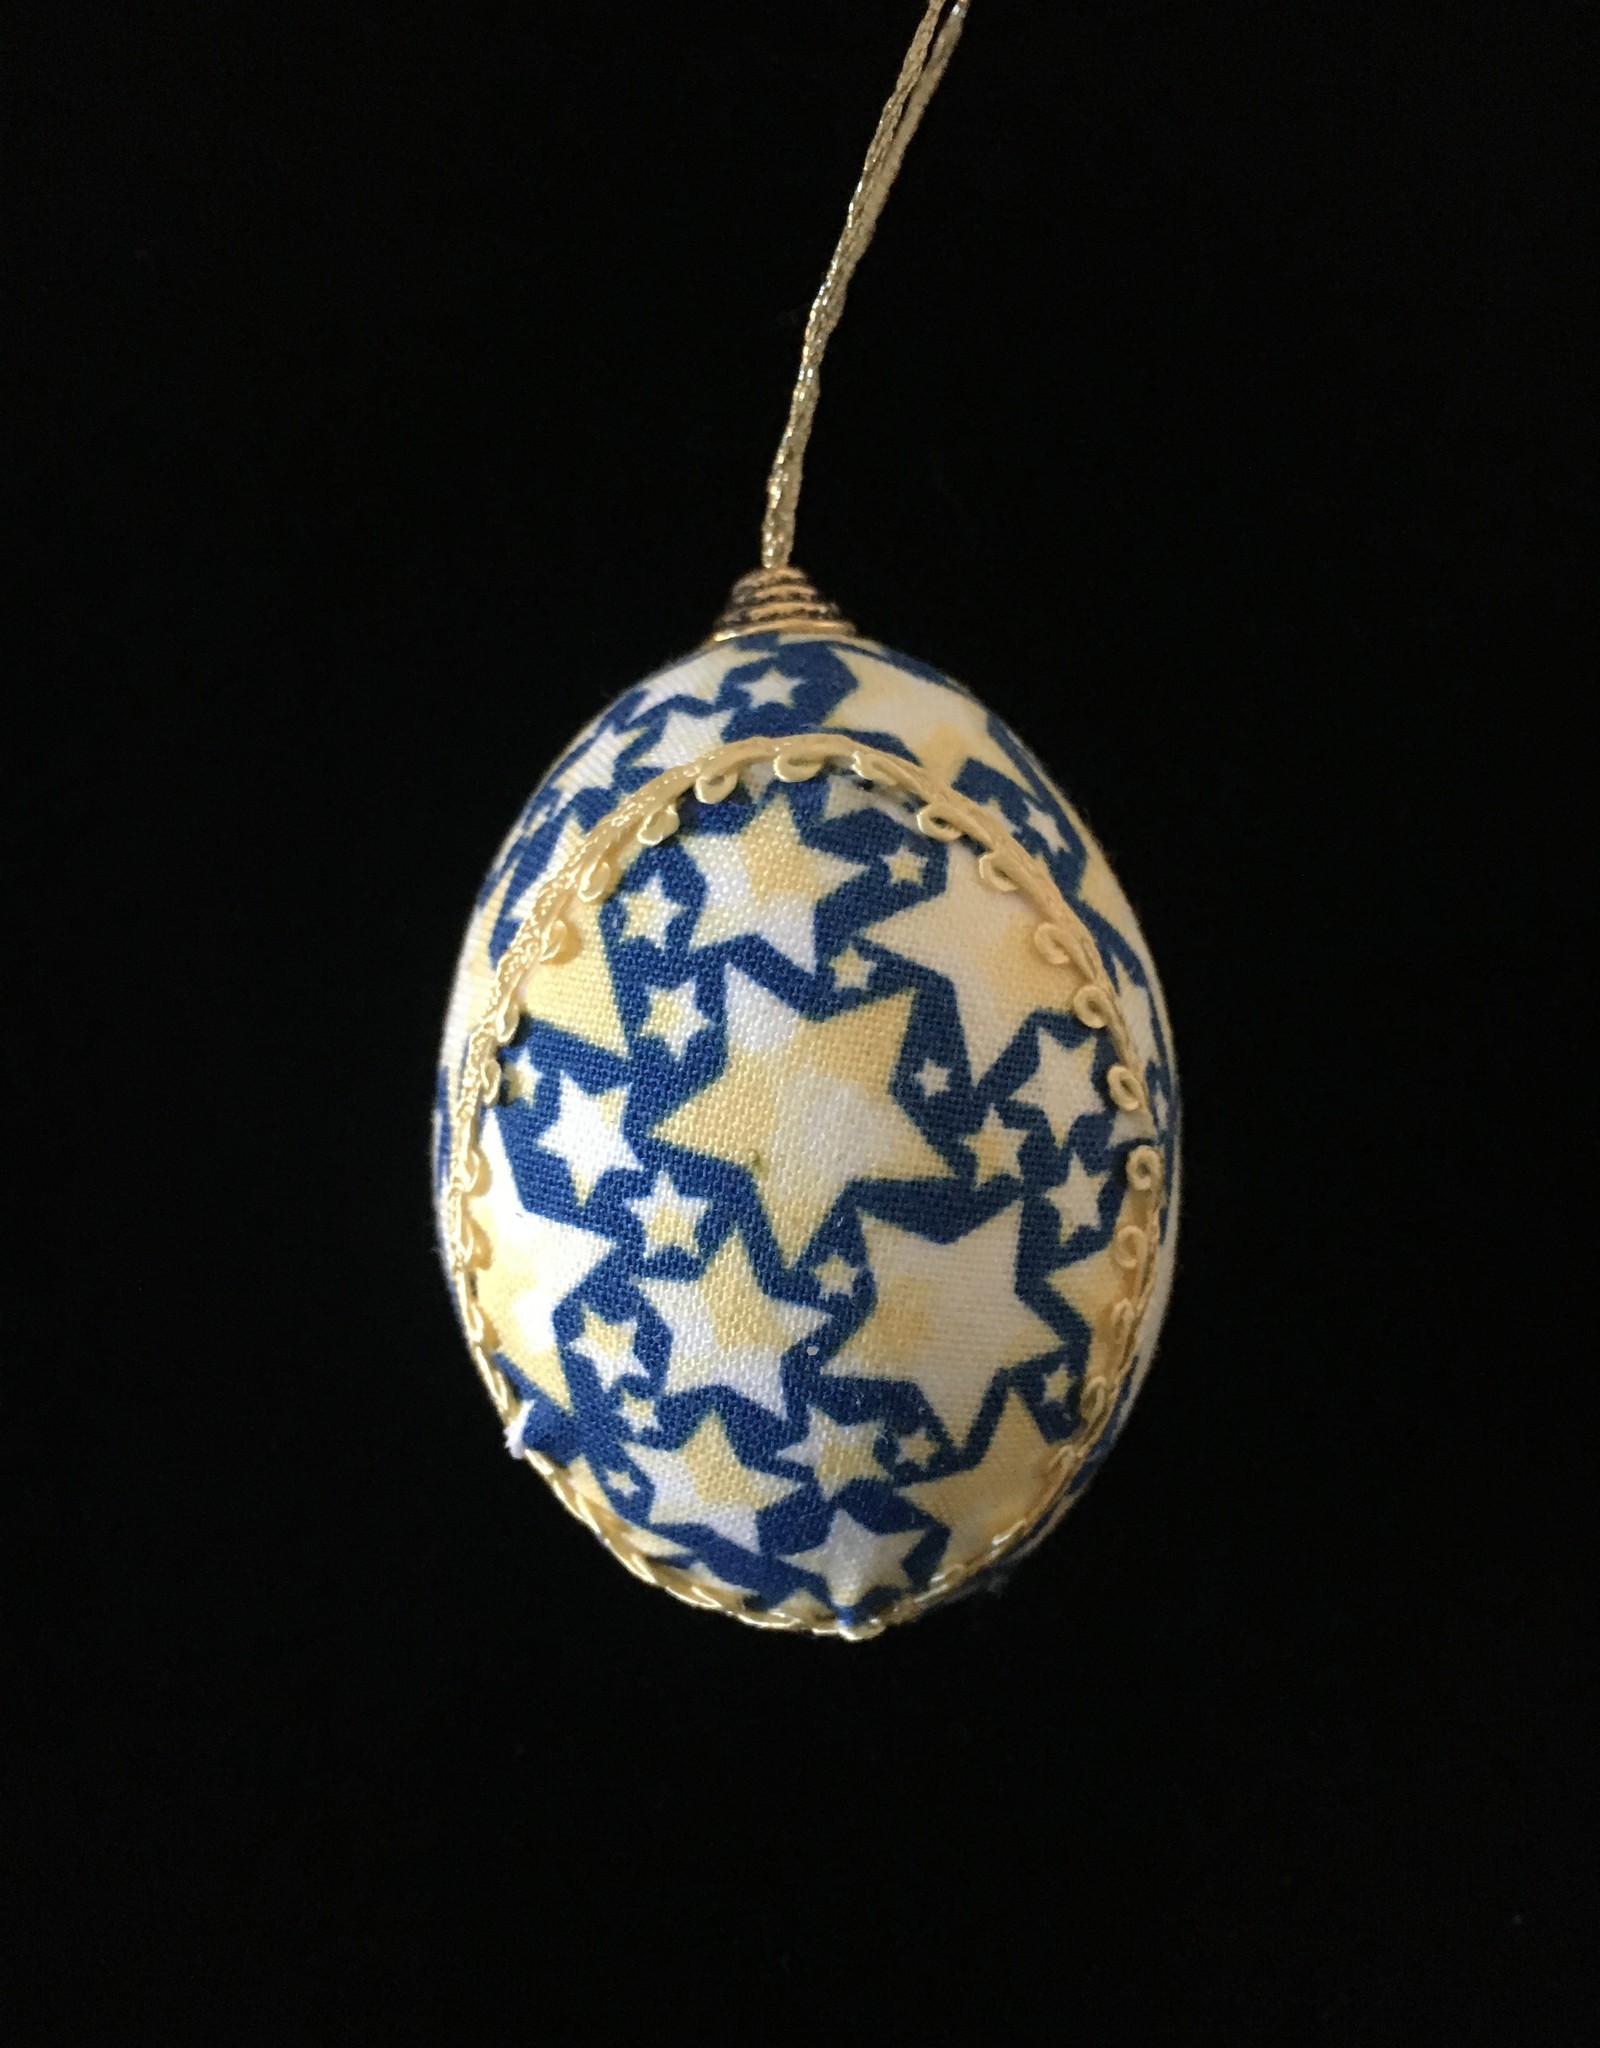 Ammi Brooks Sneetches Real Egg Ornament